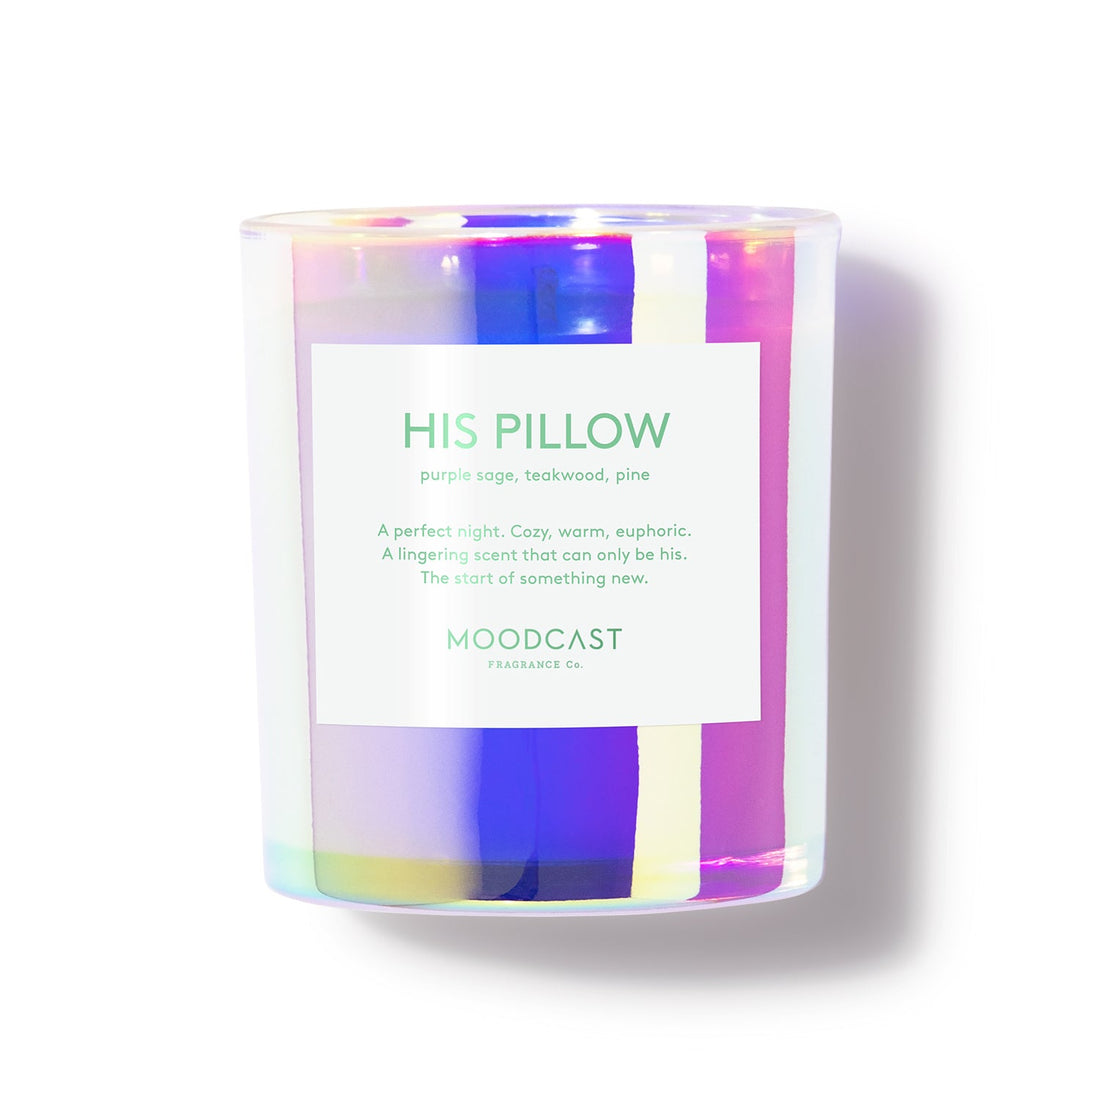 His Pillow - Vibes Collection (Iridescent) - 8oz/227g Coconut Wax Blend Glass Jar Candle - Key Notes: Purple Sage, Teakwood, Pine